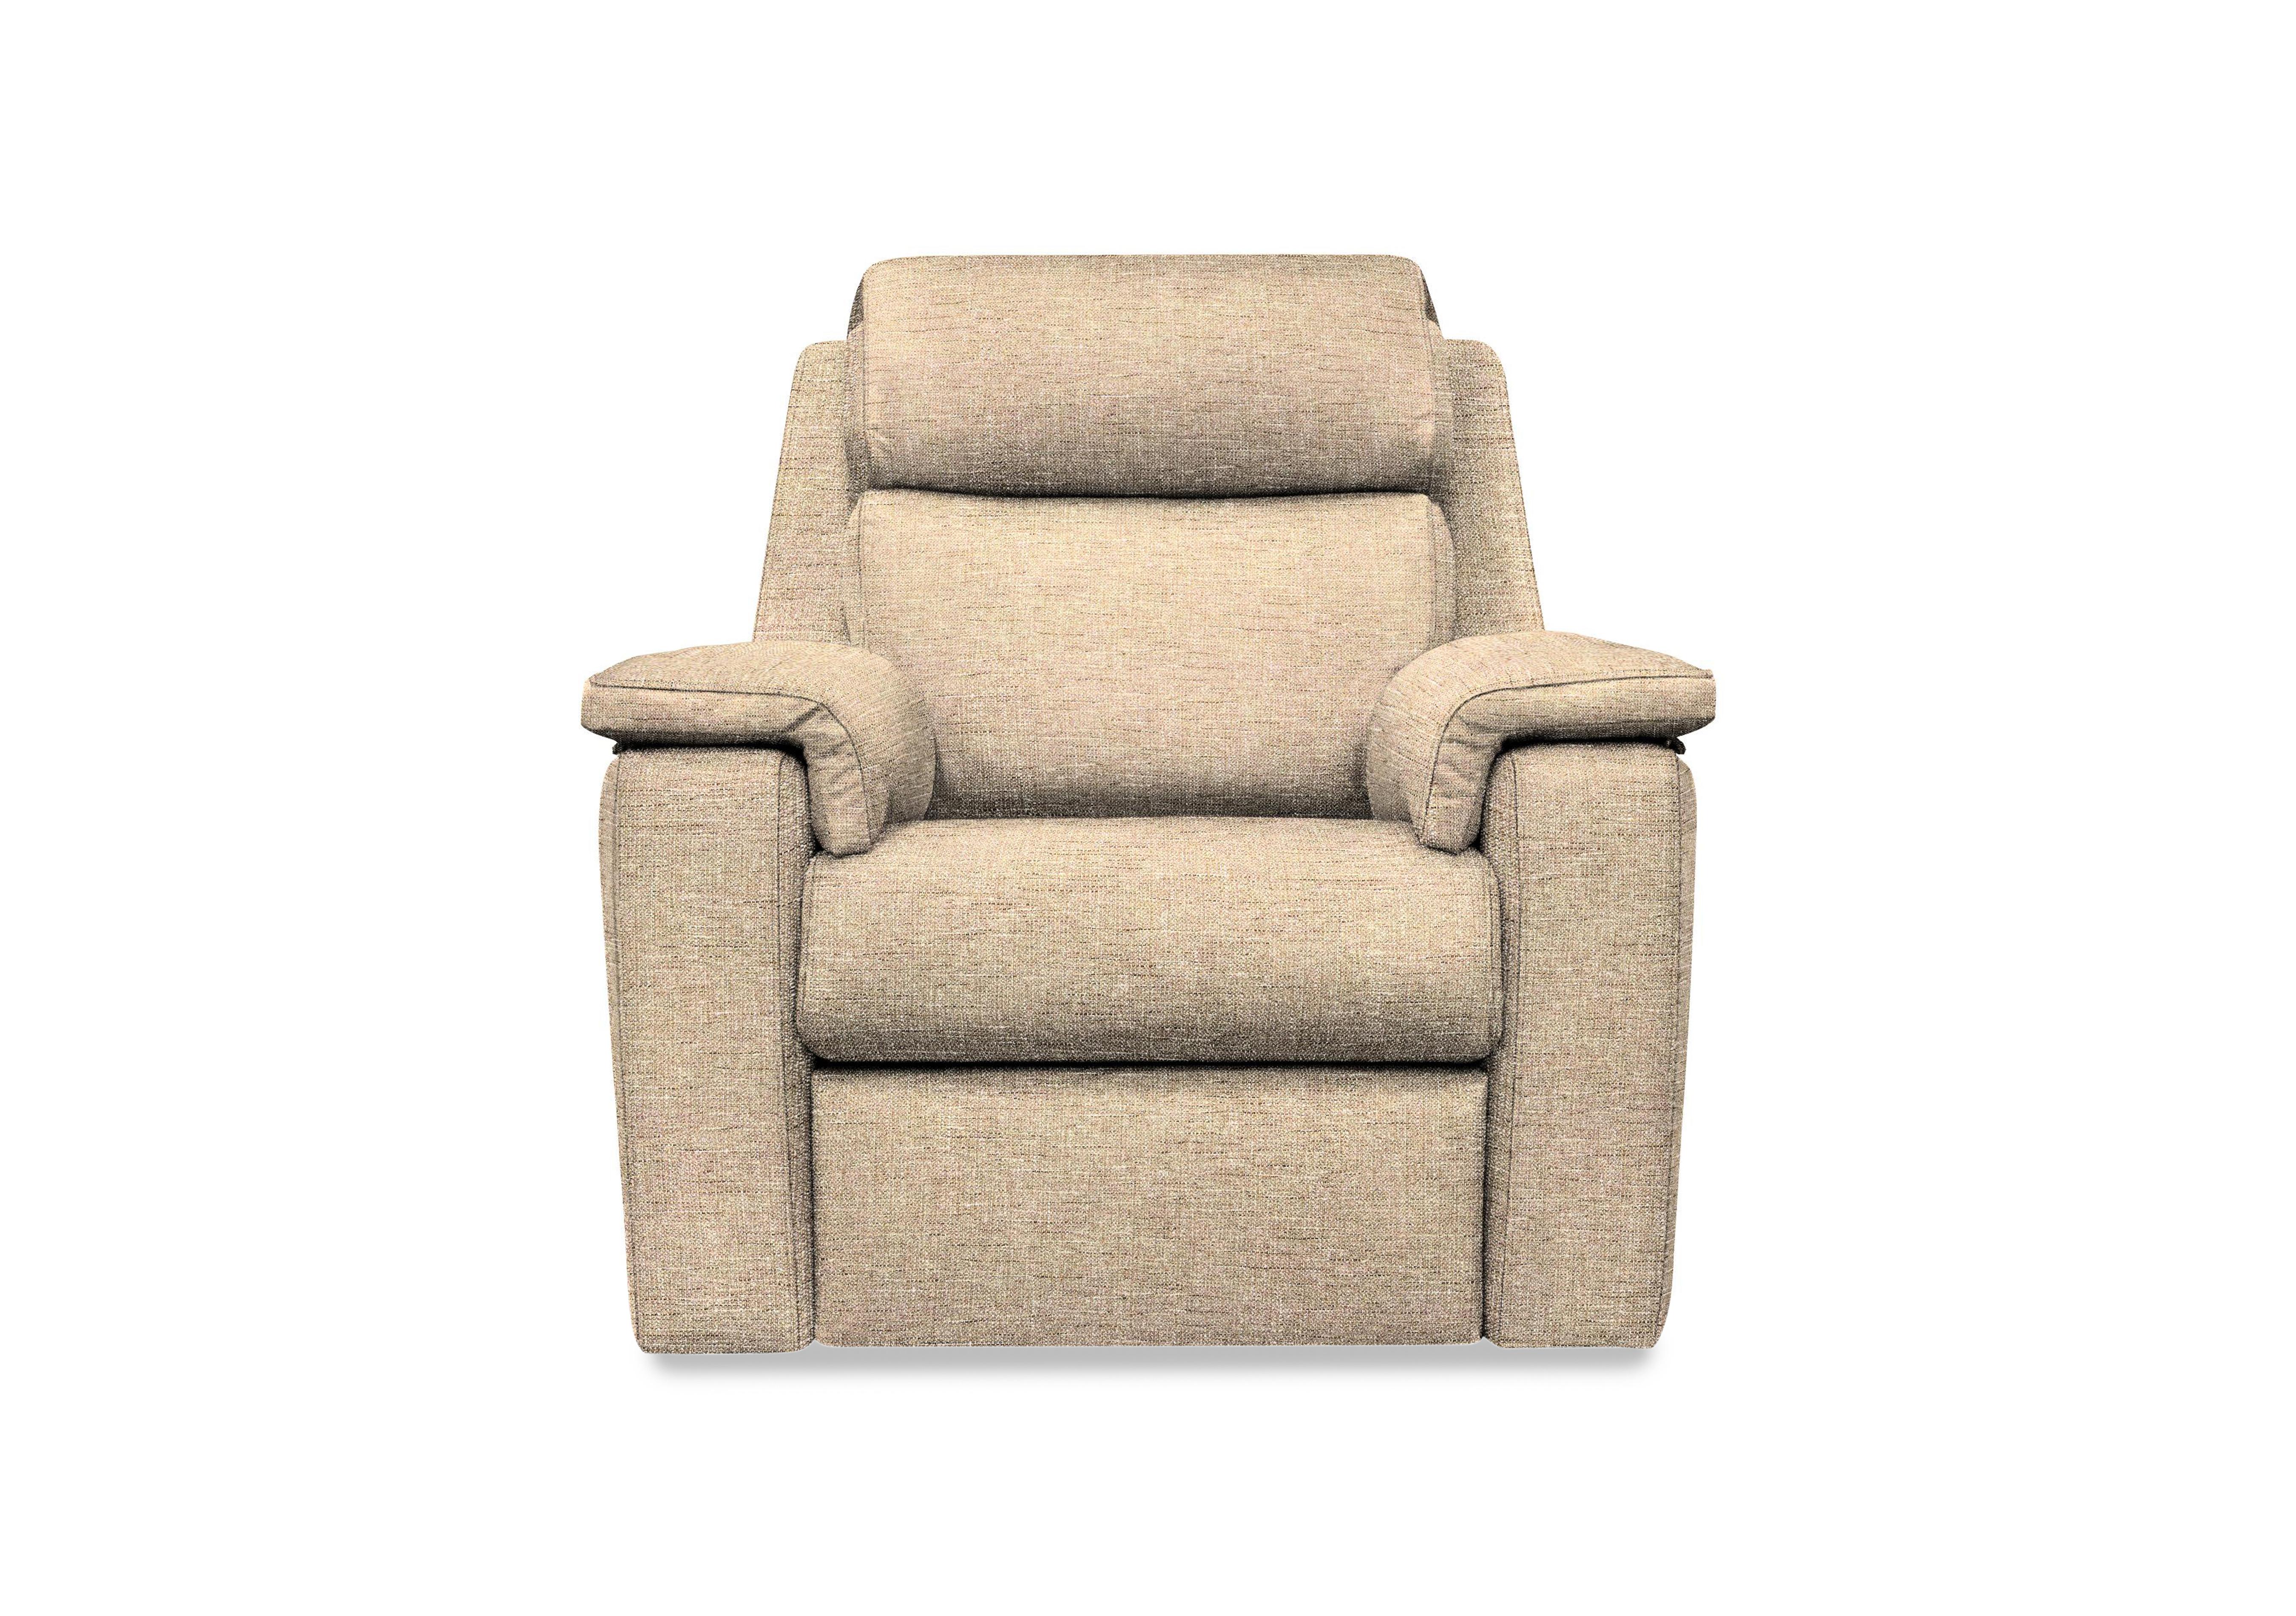 Thornbury Fabric Power Recliner Chair with Power Headrest and Power Lumbar in A022 Dapple Sparrow on Furniture Village